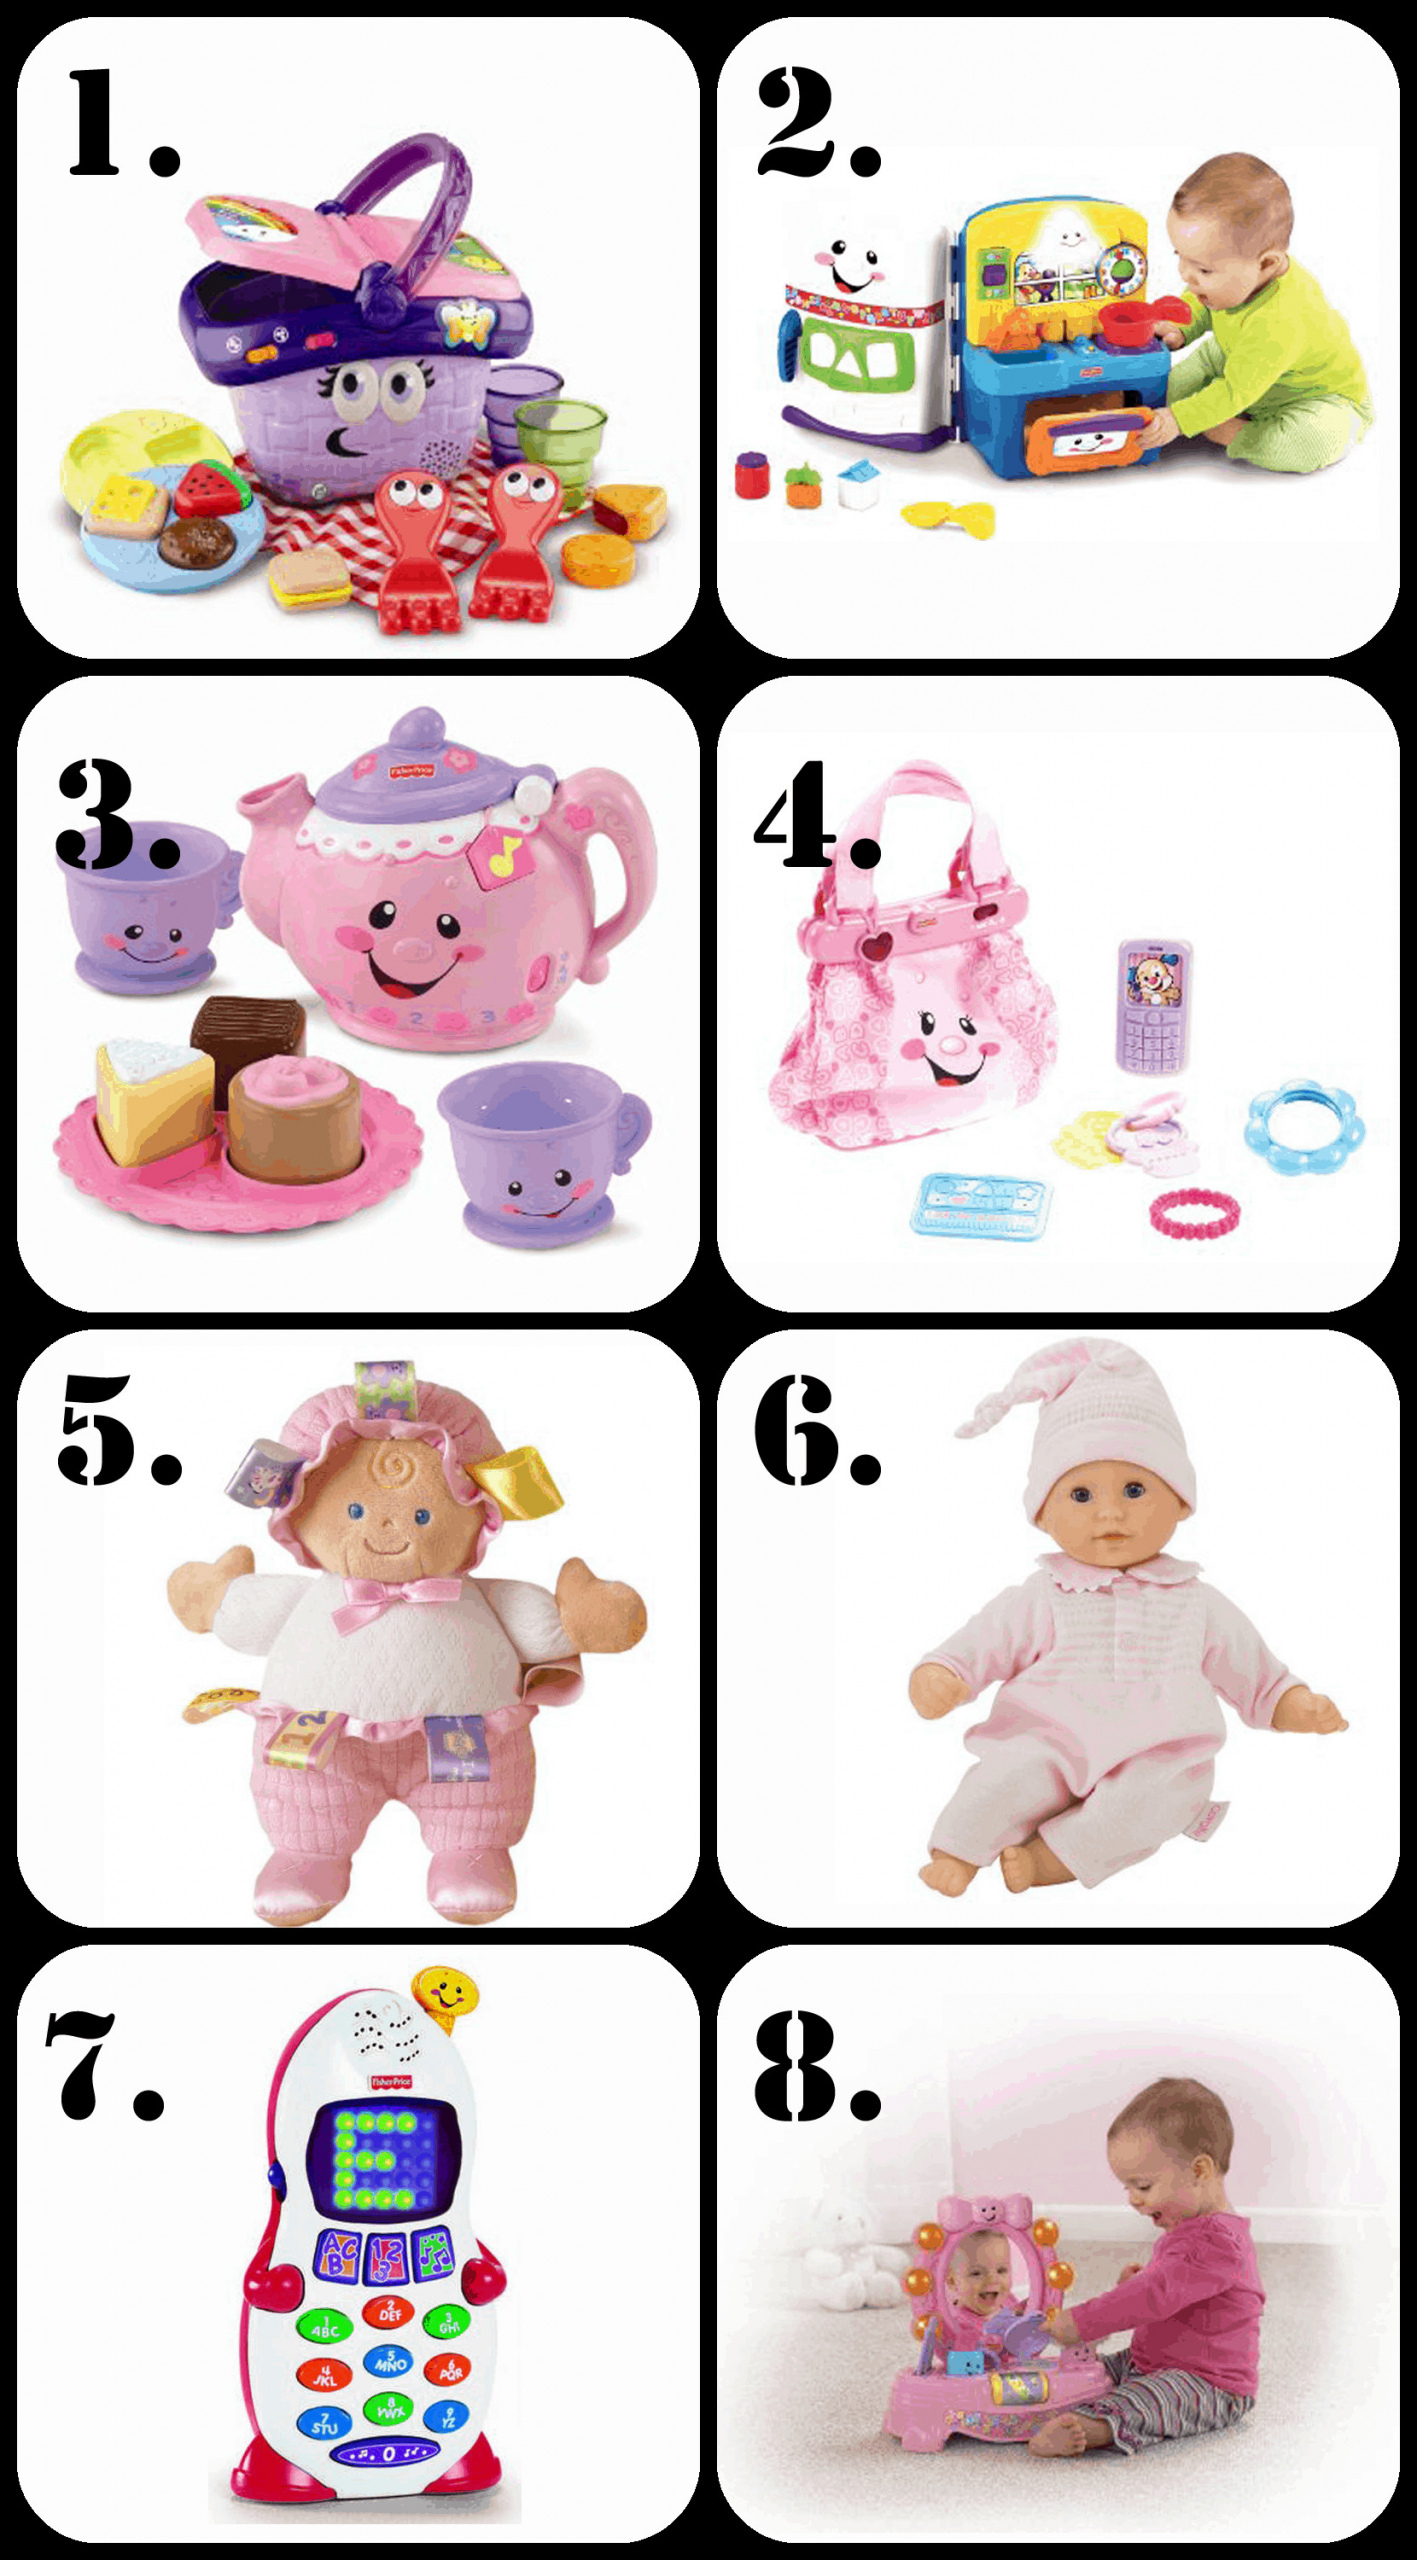 Gifts For A One Year Old Baby Girl
 The Ultimate List of Gift Ideas for a 1 Year Old Girl